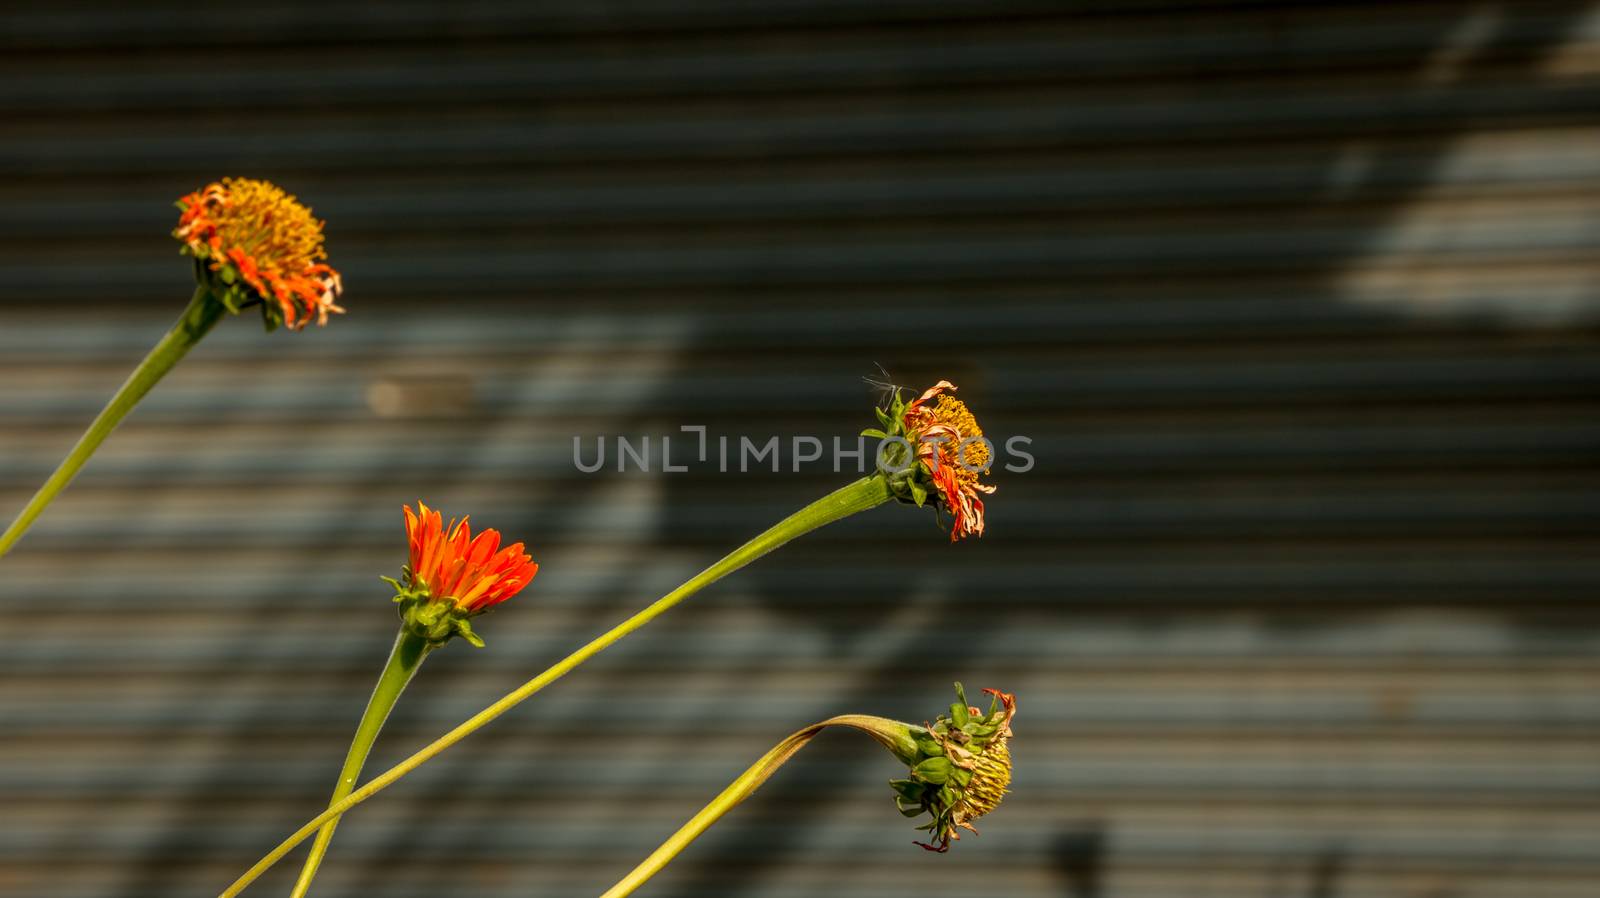 Orange Daisies without Leaf on Corrugated Background/ Roller Shutter Door. Street Photography. Countryside Thailand.